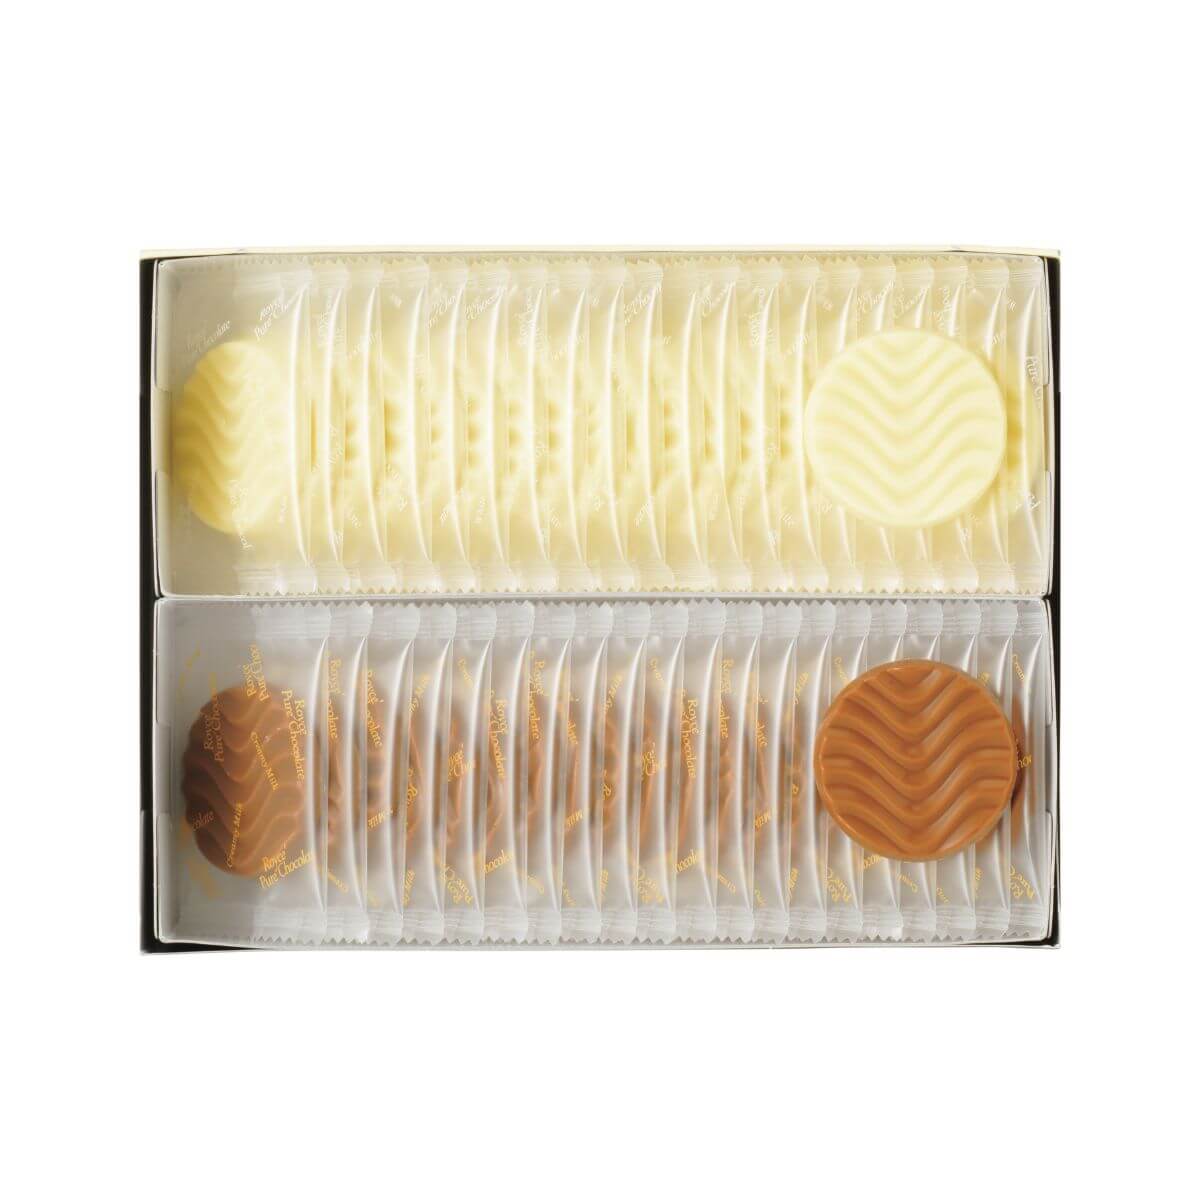 ROYCE' Chocolate - Pure Chocolate "Creamy Milk & White" - Image shows a box filled with individually-wrapped white chocolates on top and brown chocolates on the bottom.